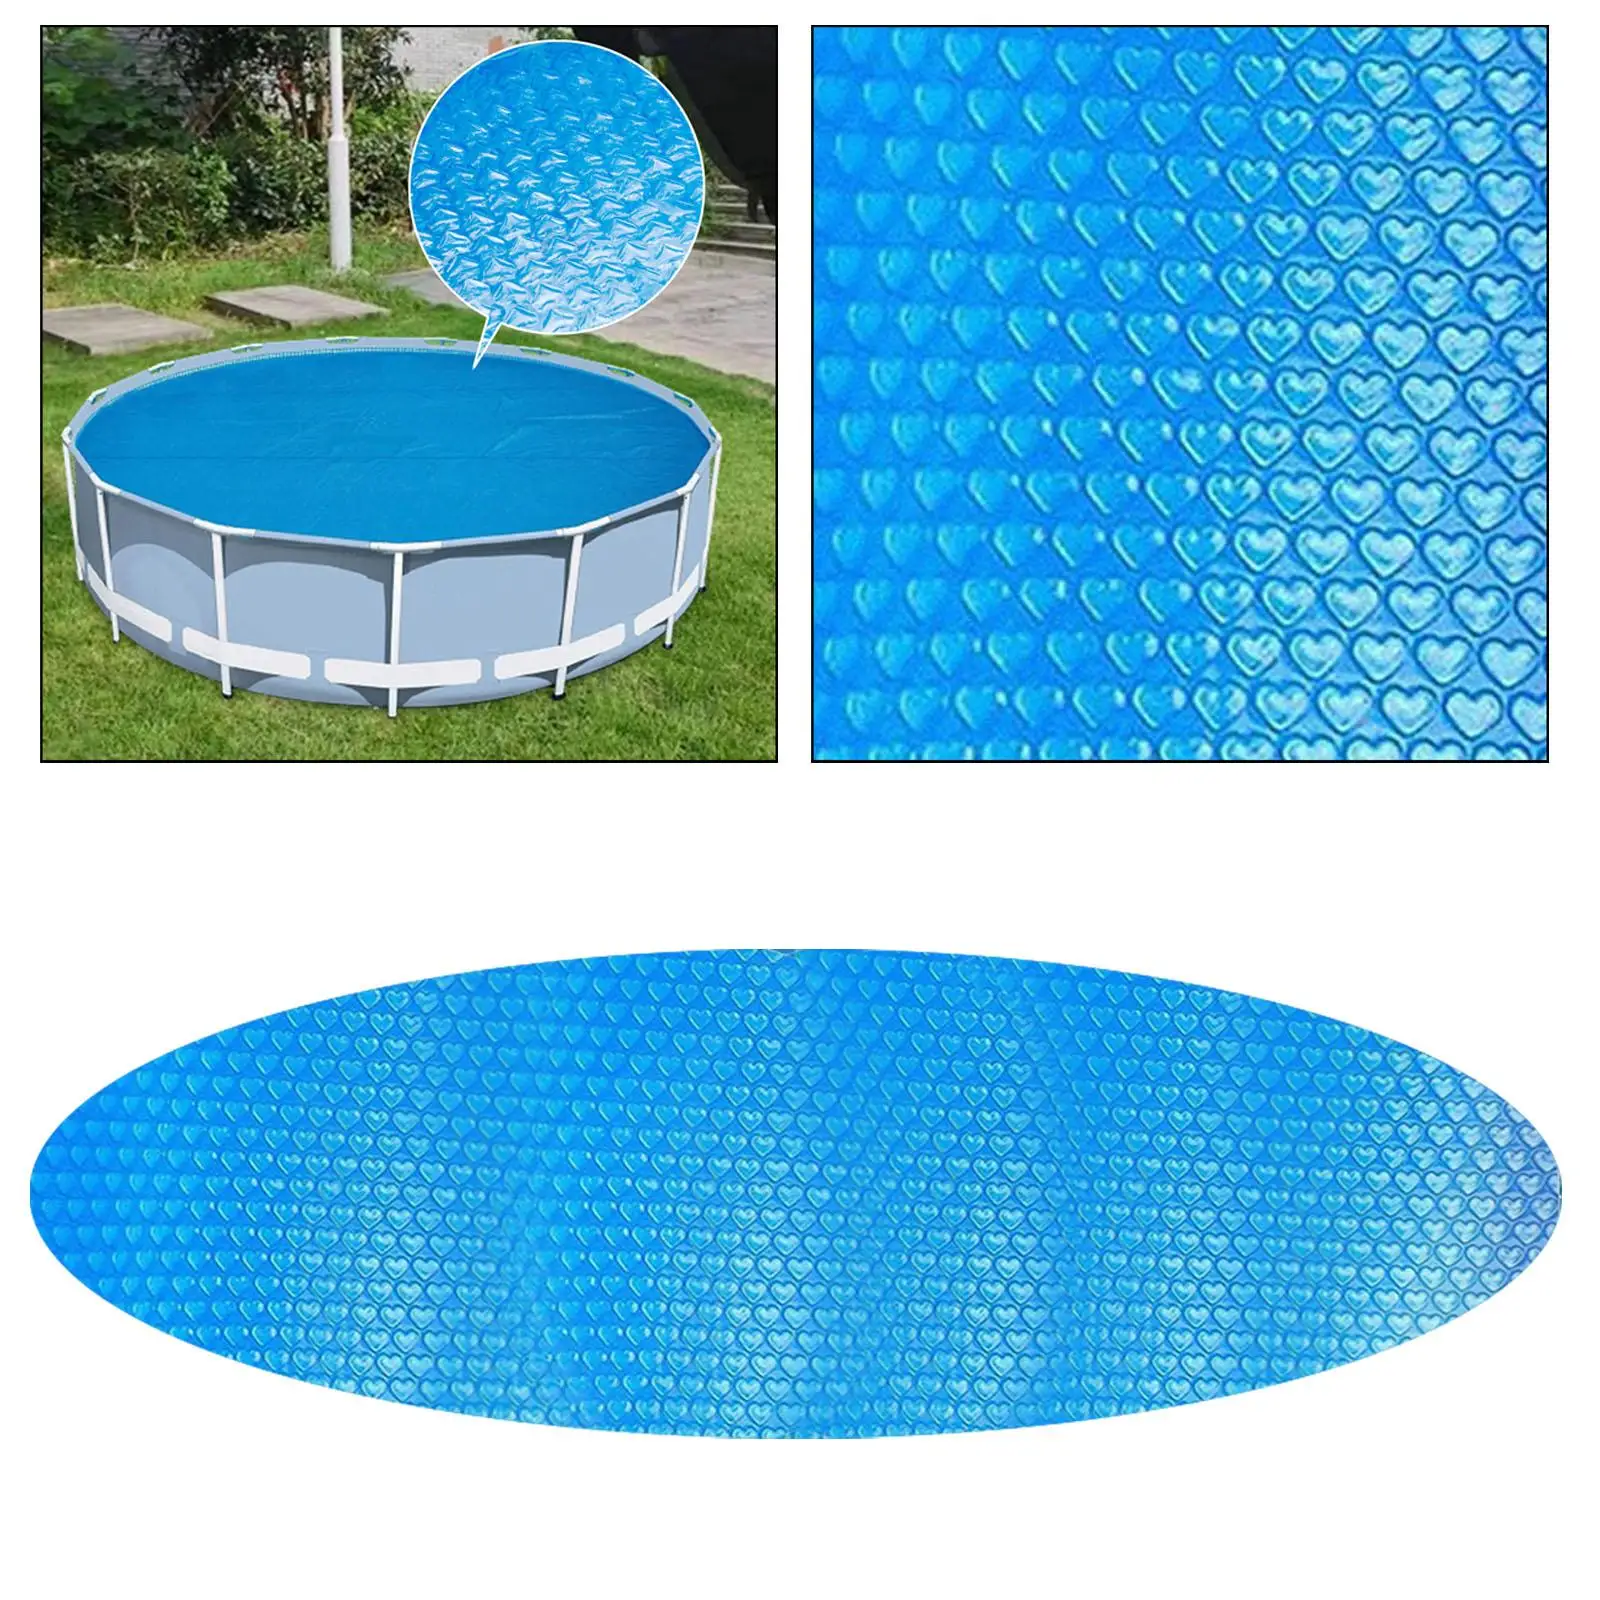 Swimming cover Round Waterproof Durability Dustproof Durable Pools Protector for Inflatable Pool Outdoor sports Garden